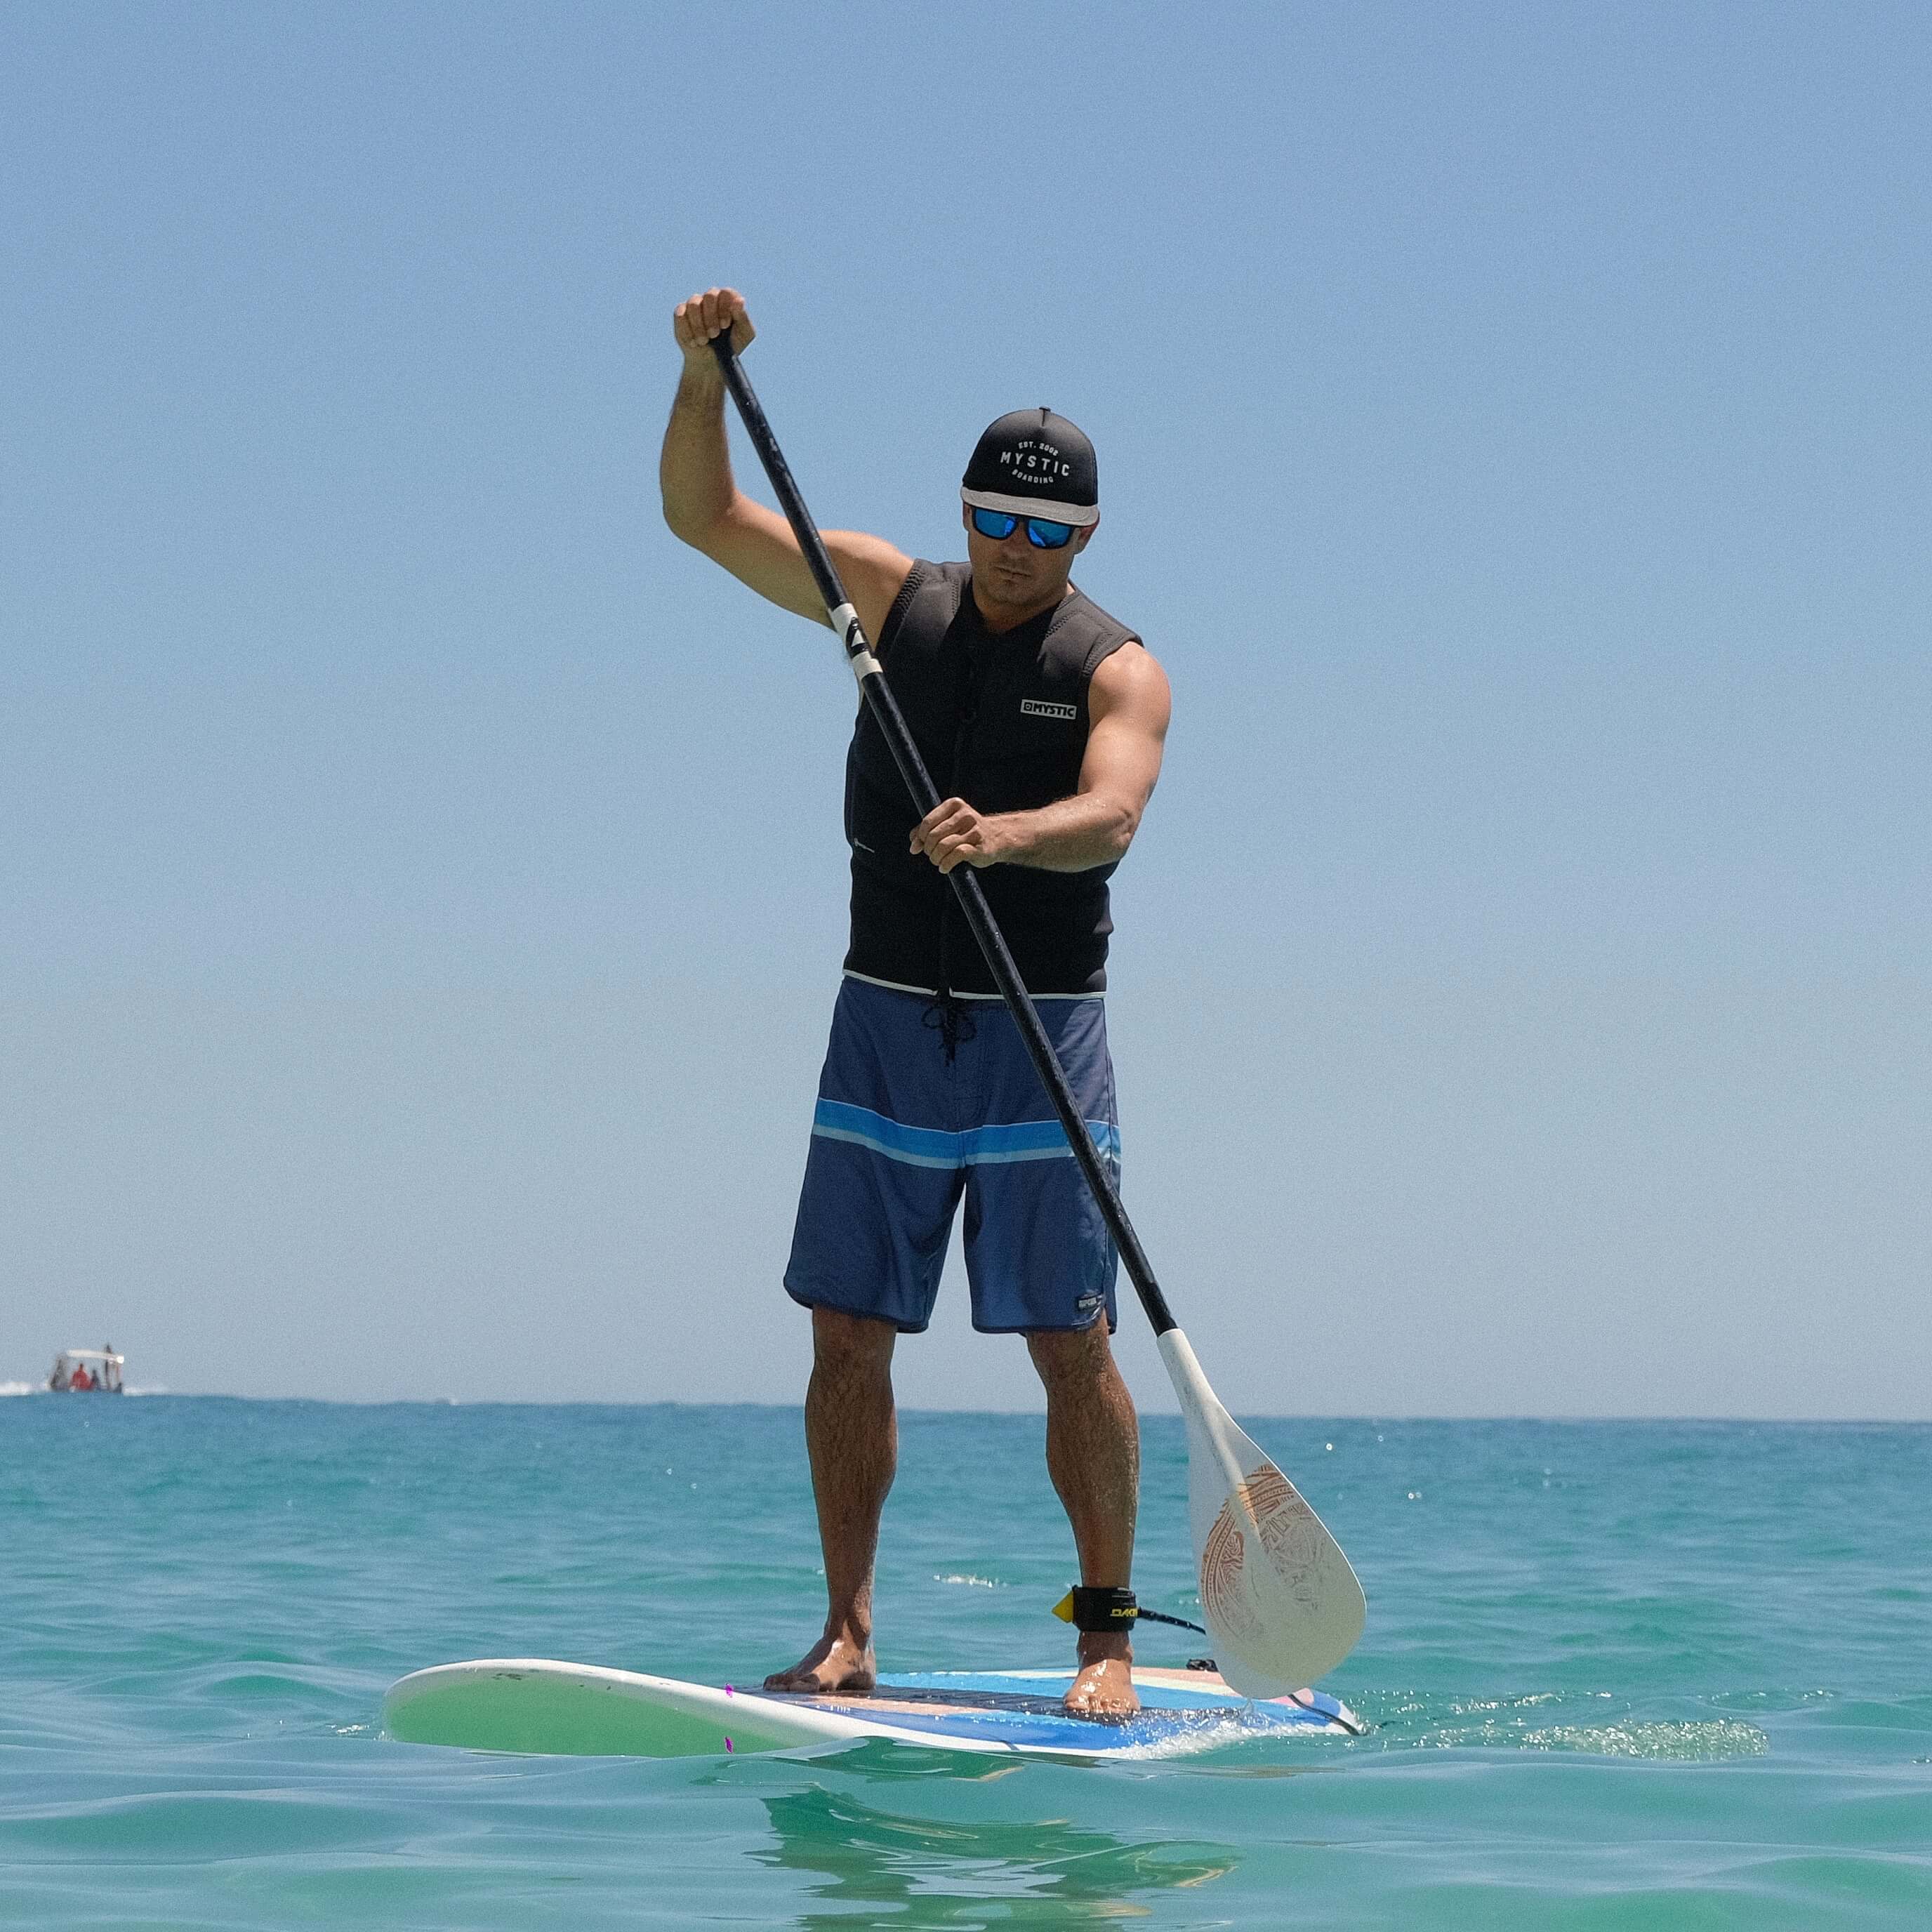 Man on Stand Up Paddle